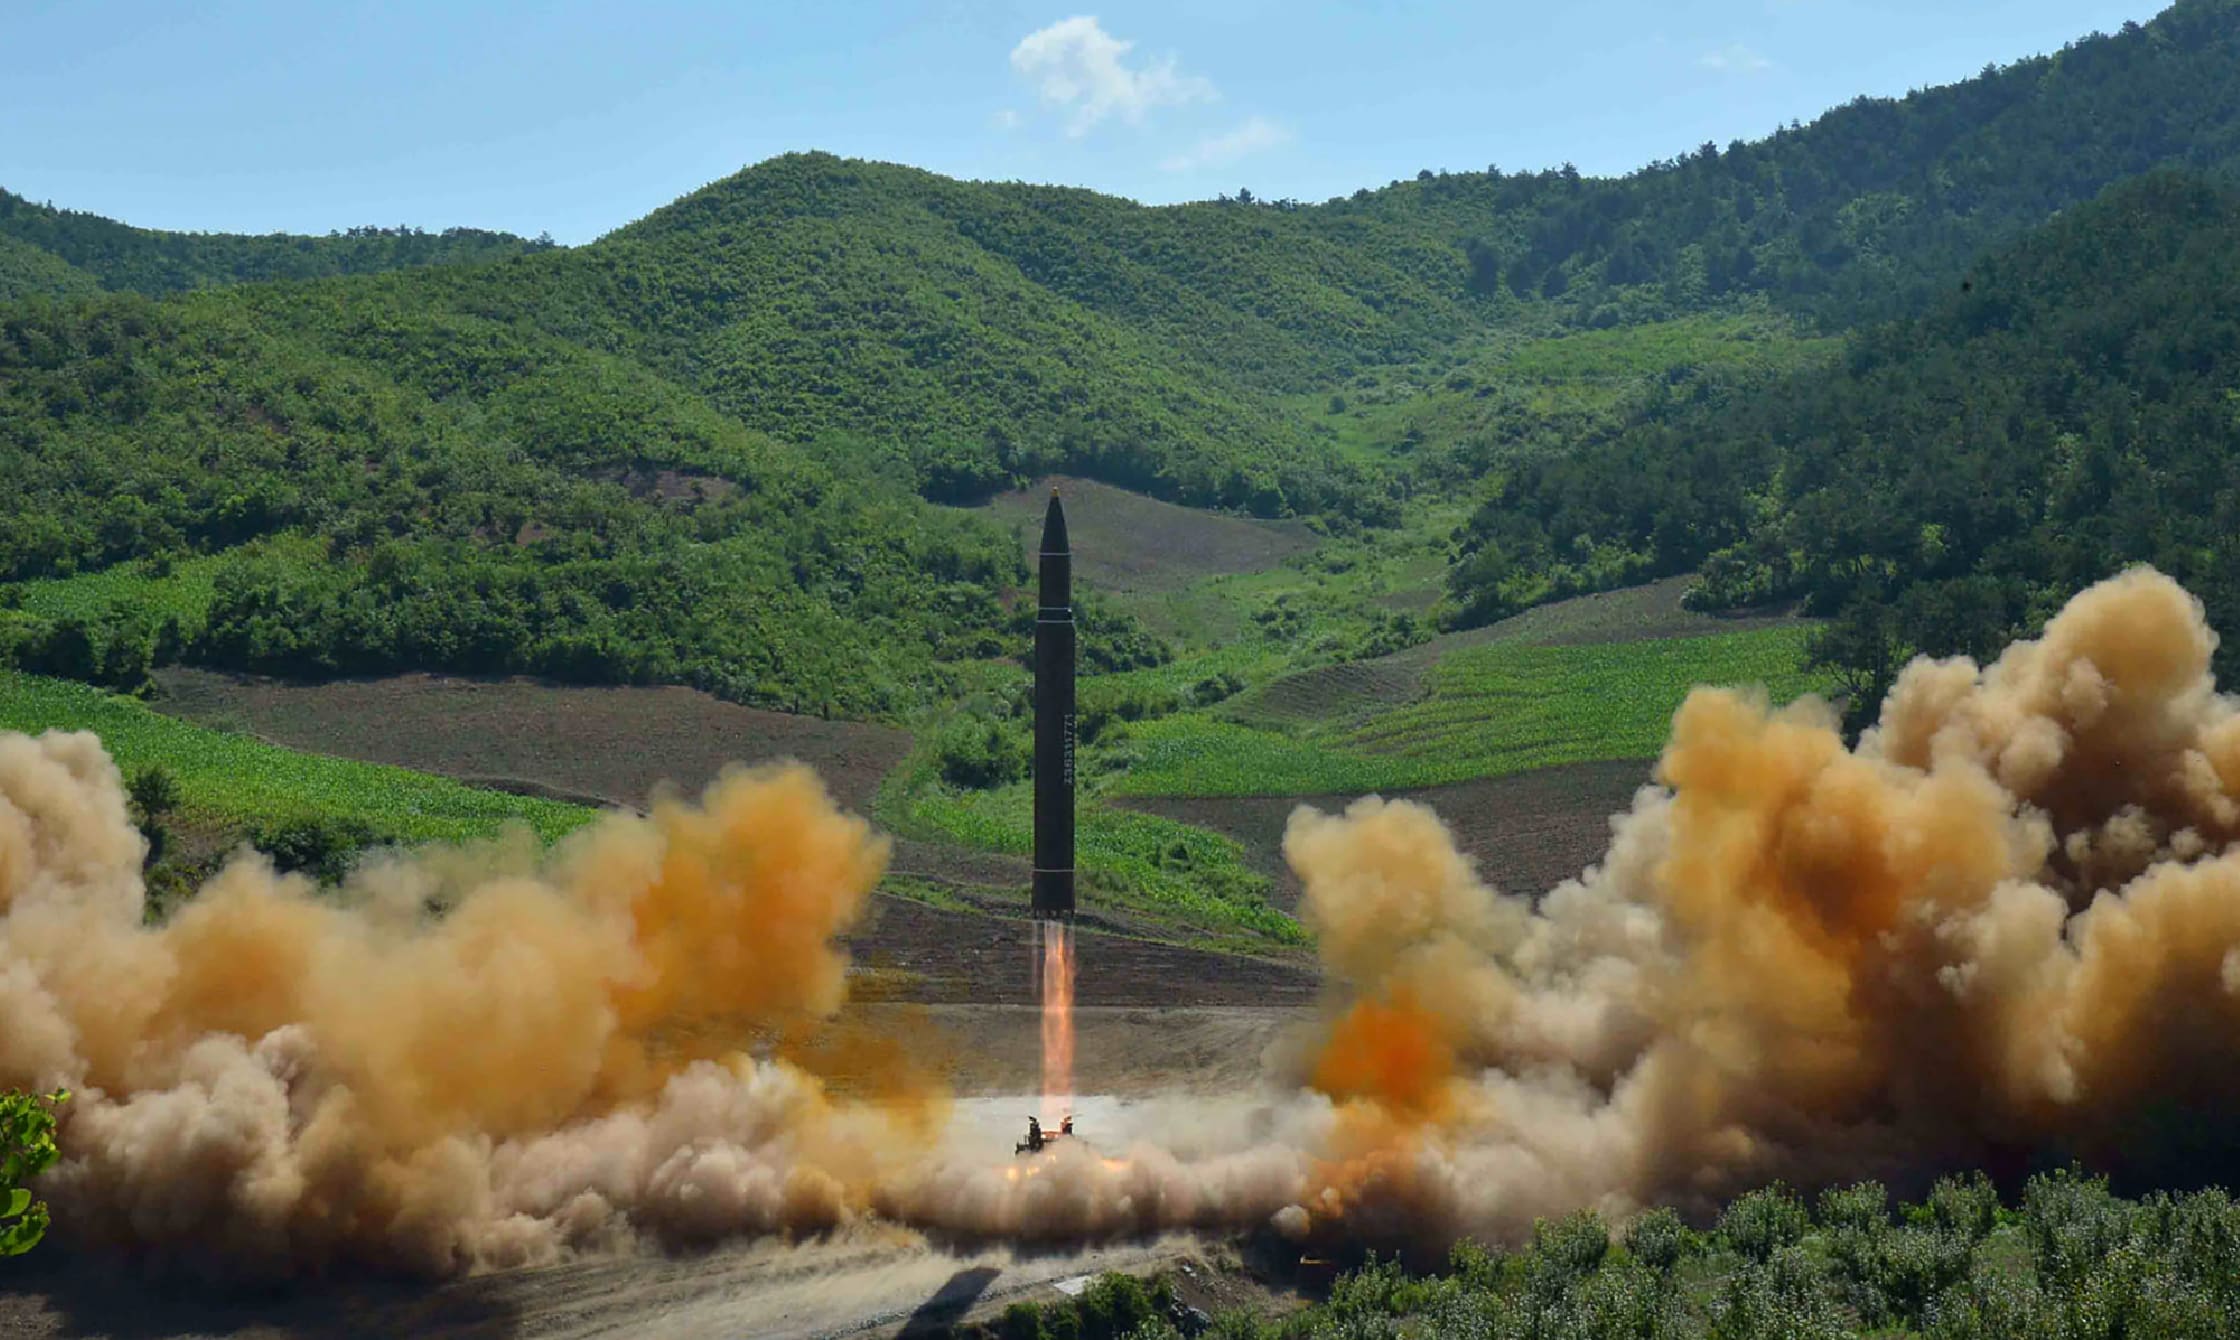 North Korea's official Korean Central News Agency (KCNA) released an image of the intercontinental ballistic missile Hwasong-14 at an undisclosed location.